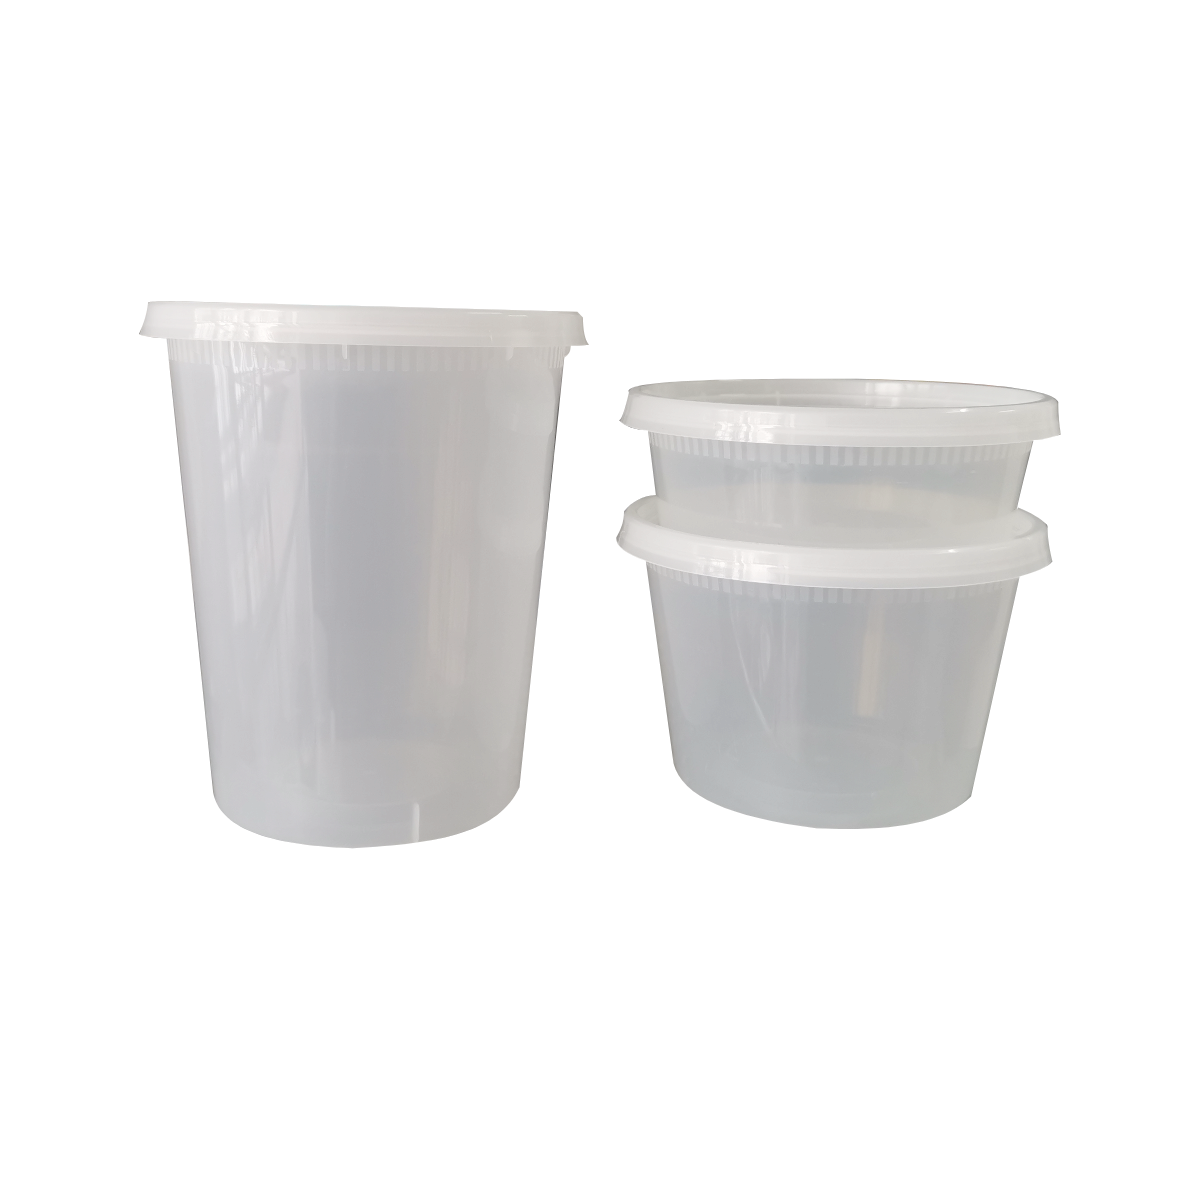 SOUP CONTAINERS  Kitchmart Trading Corp